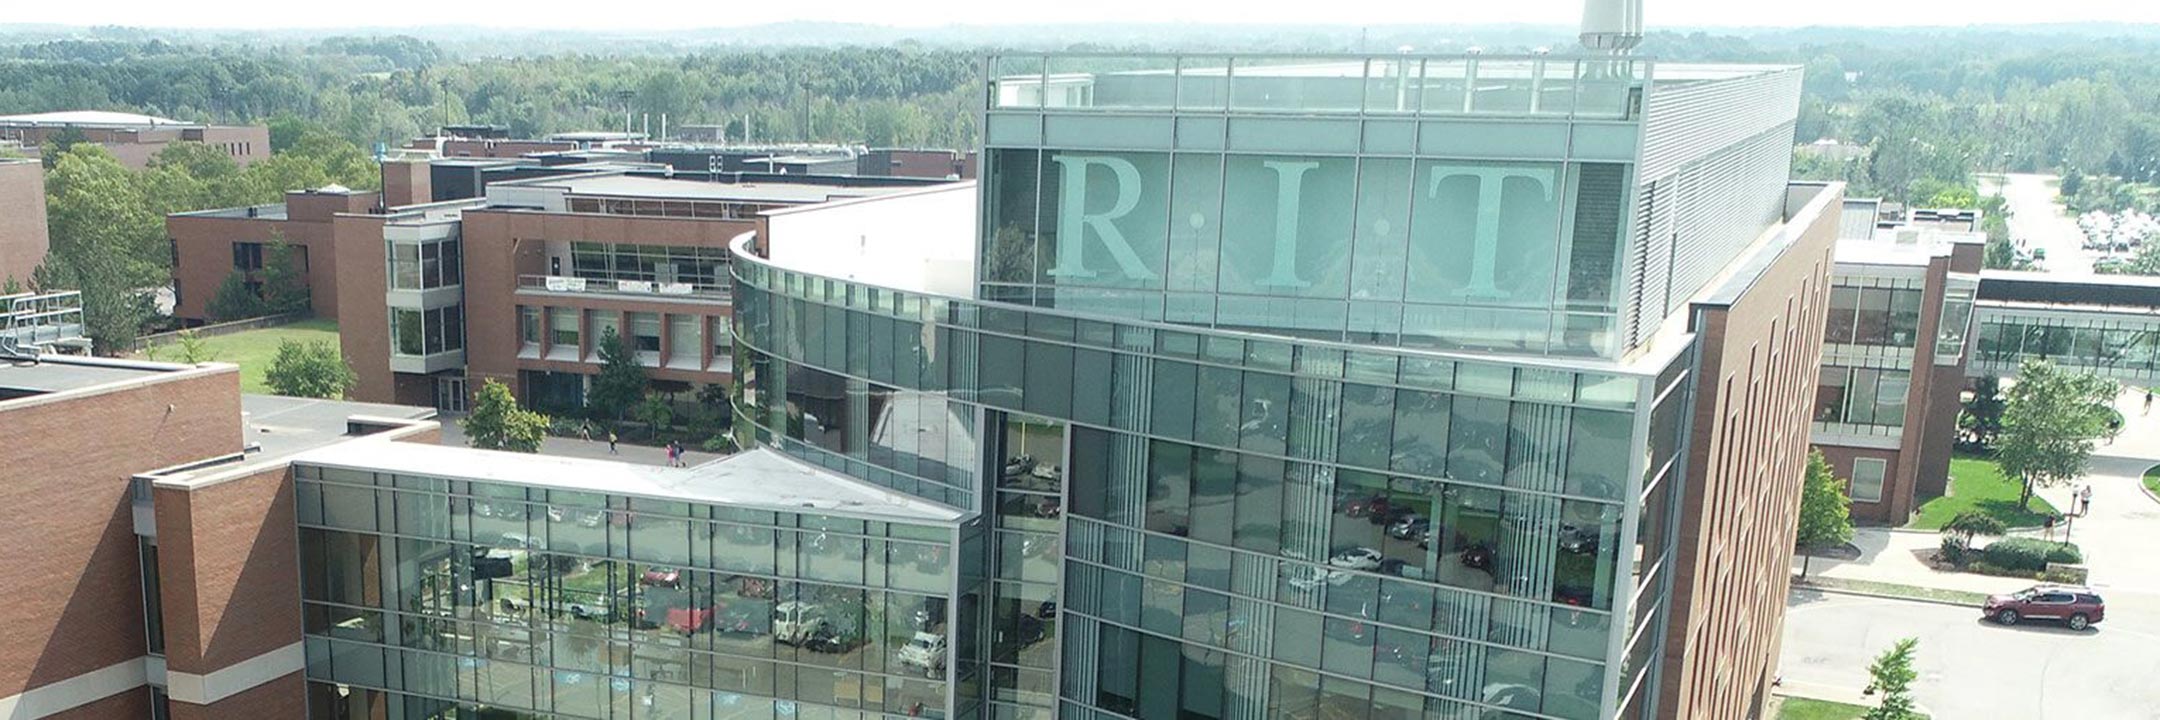 aerial photo of the campus center at RIT